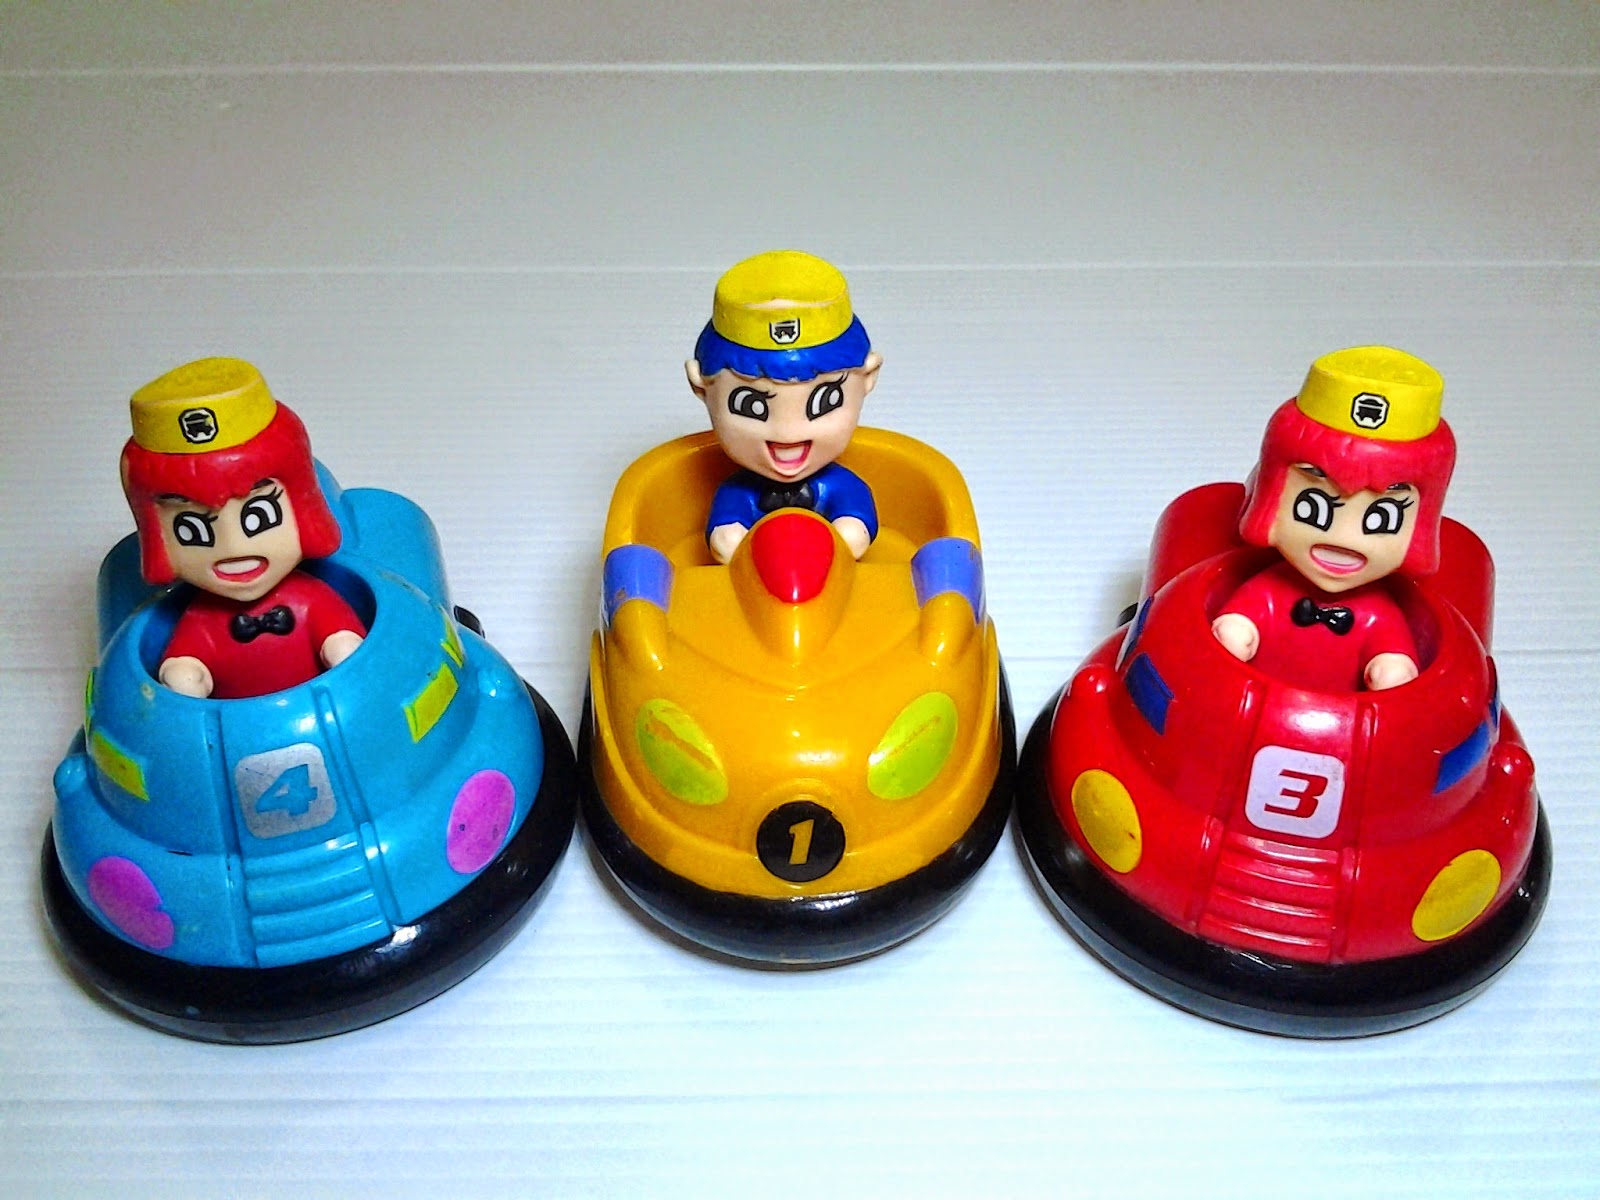 Bumper cars игрушка. Bumper cars Kids Toys. Игрушки а4. Toys 4 us